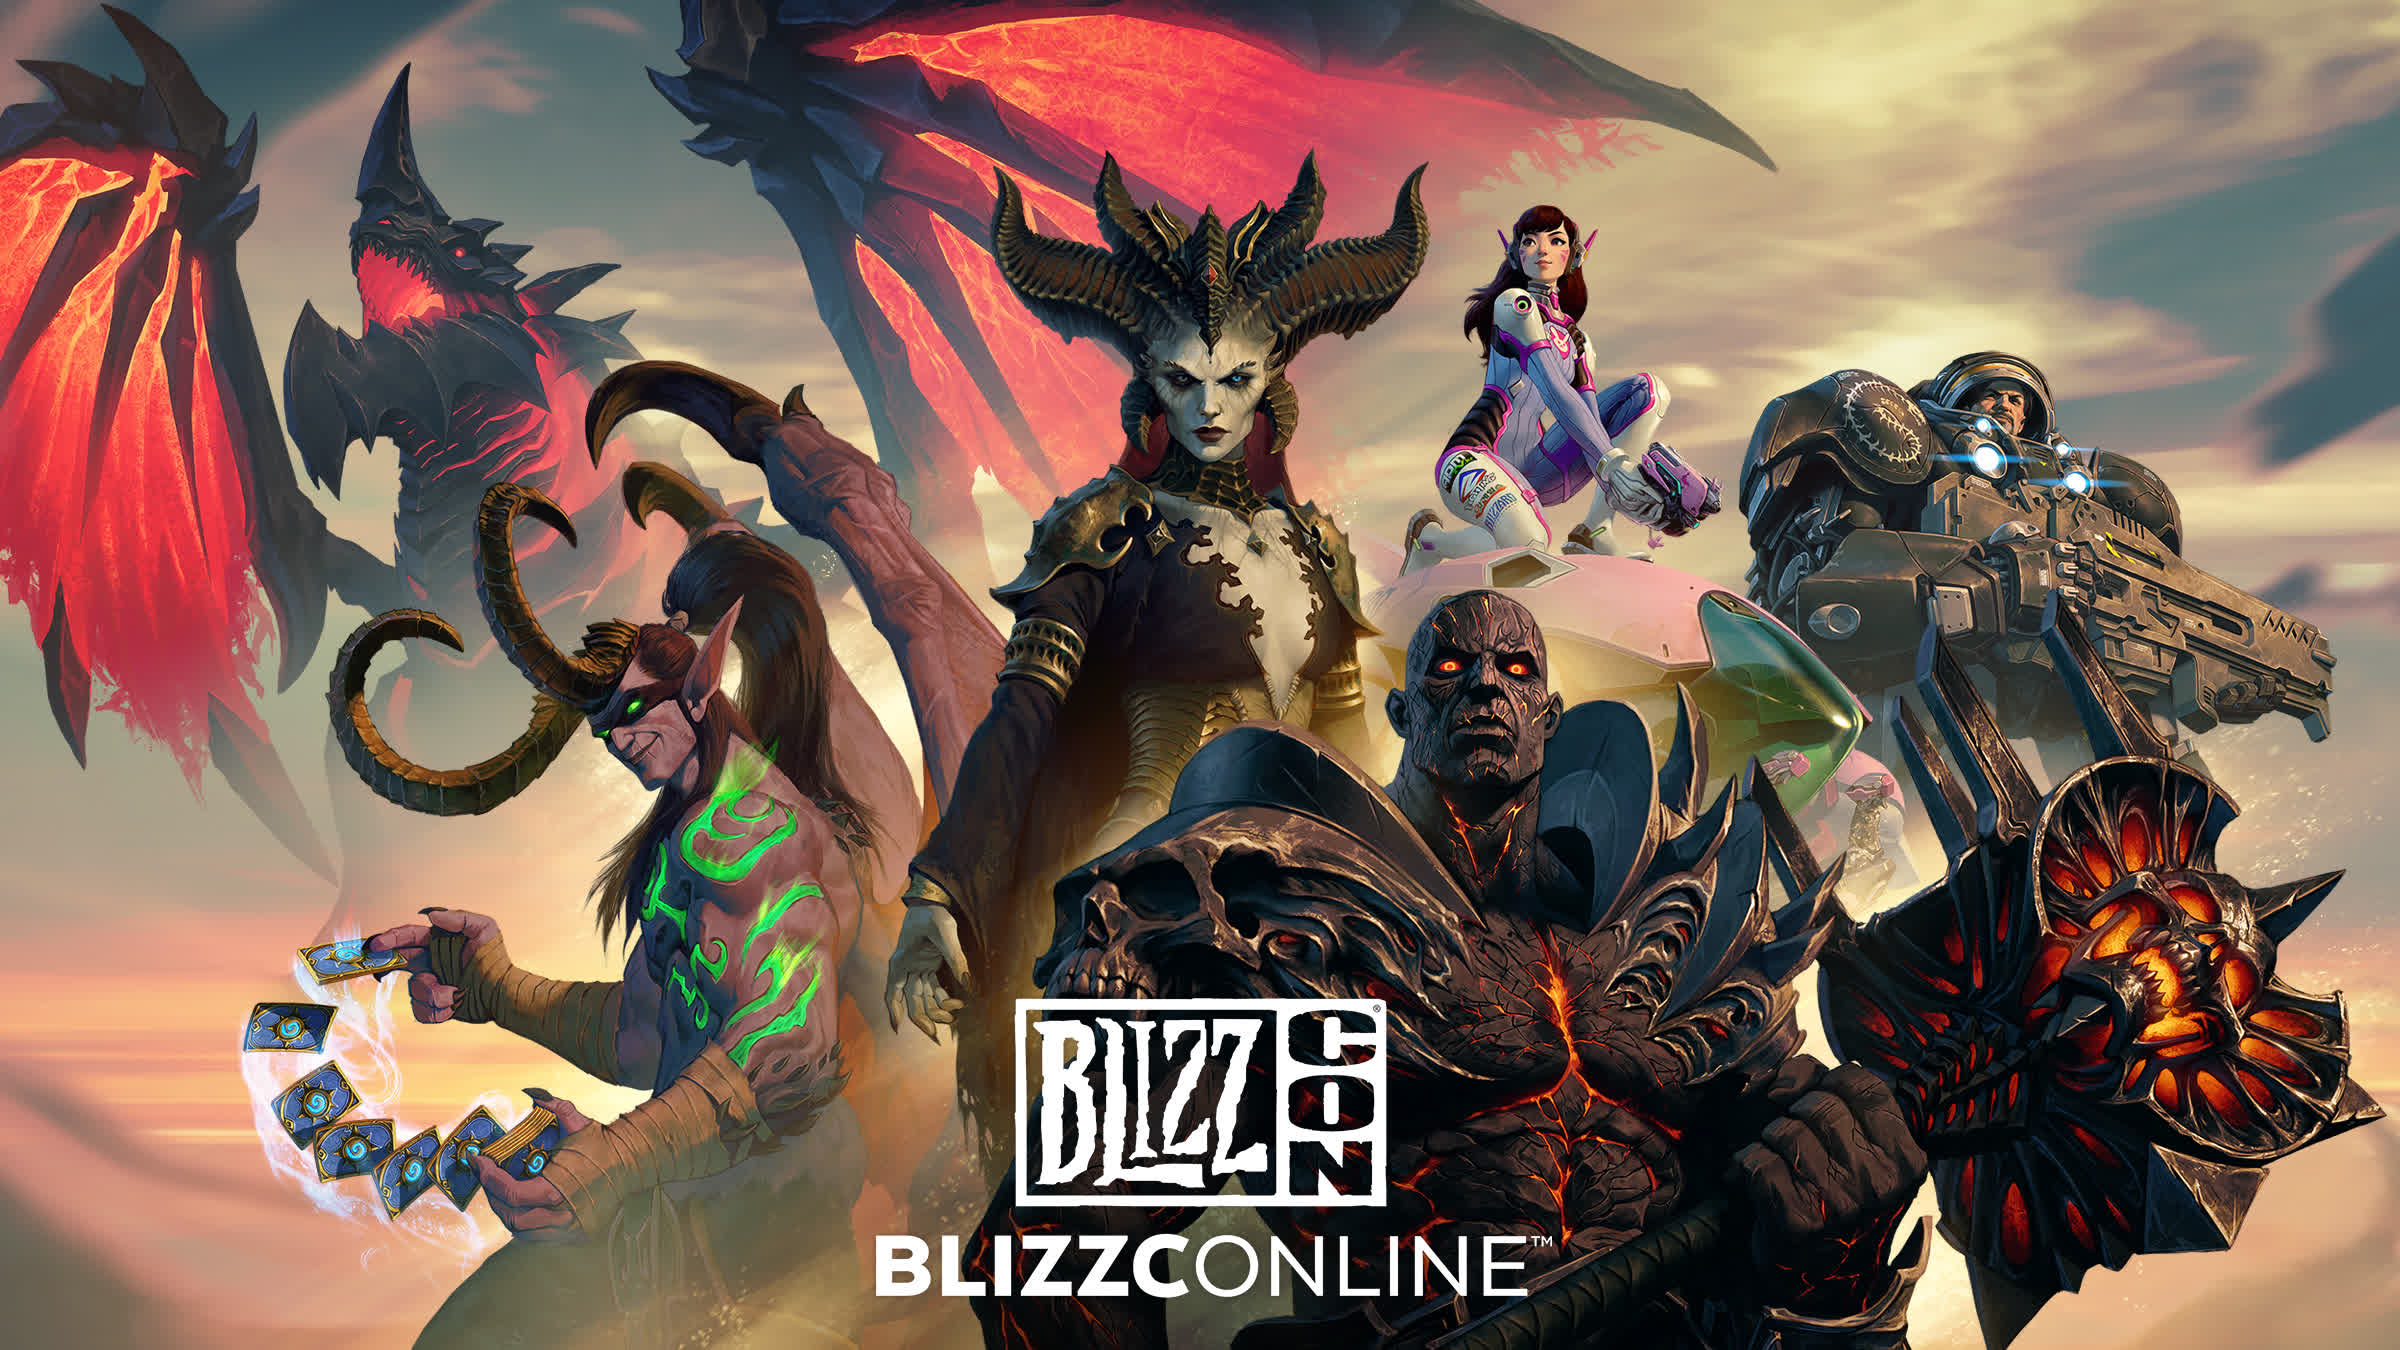 BlizzCon 2021 is canceled, BlizzConline returns early next year